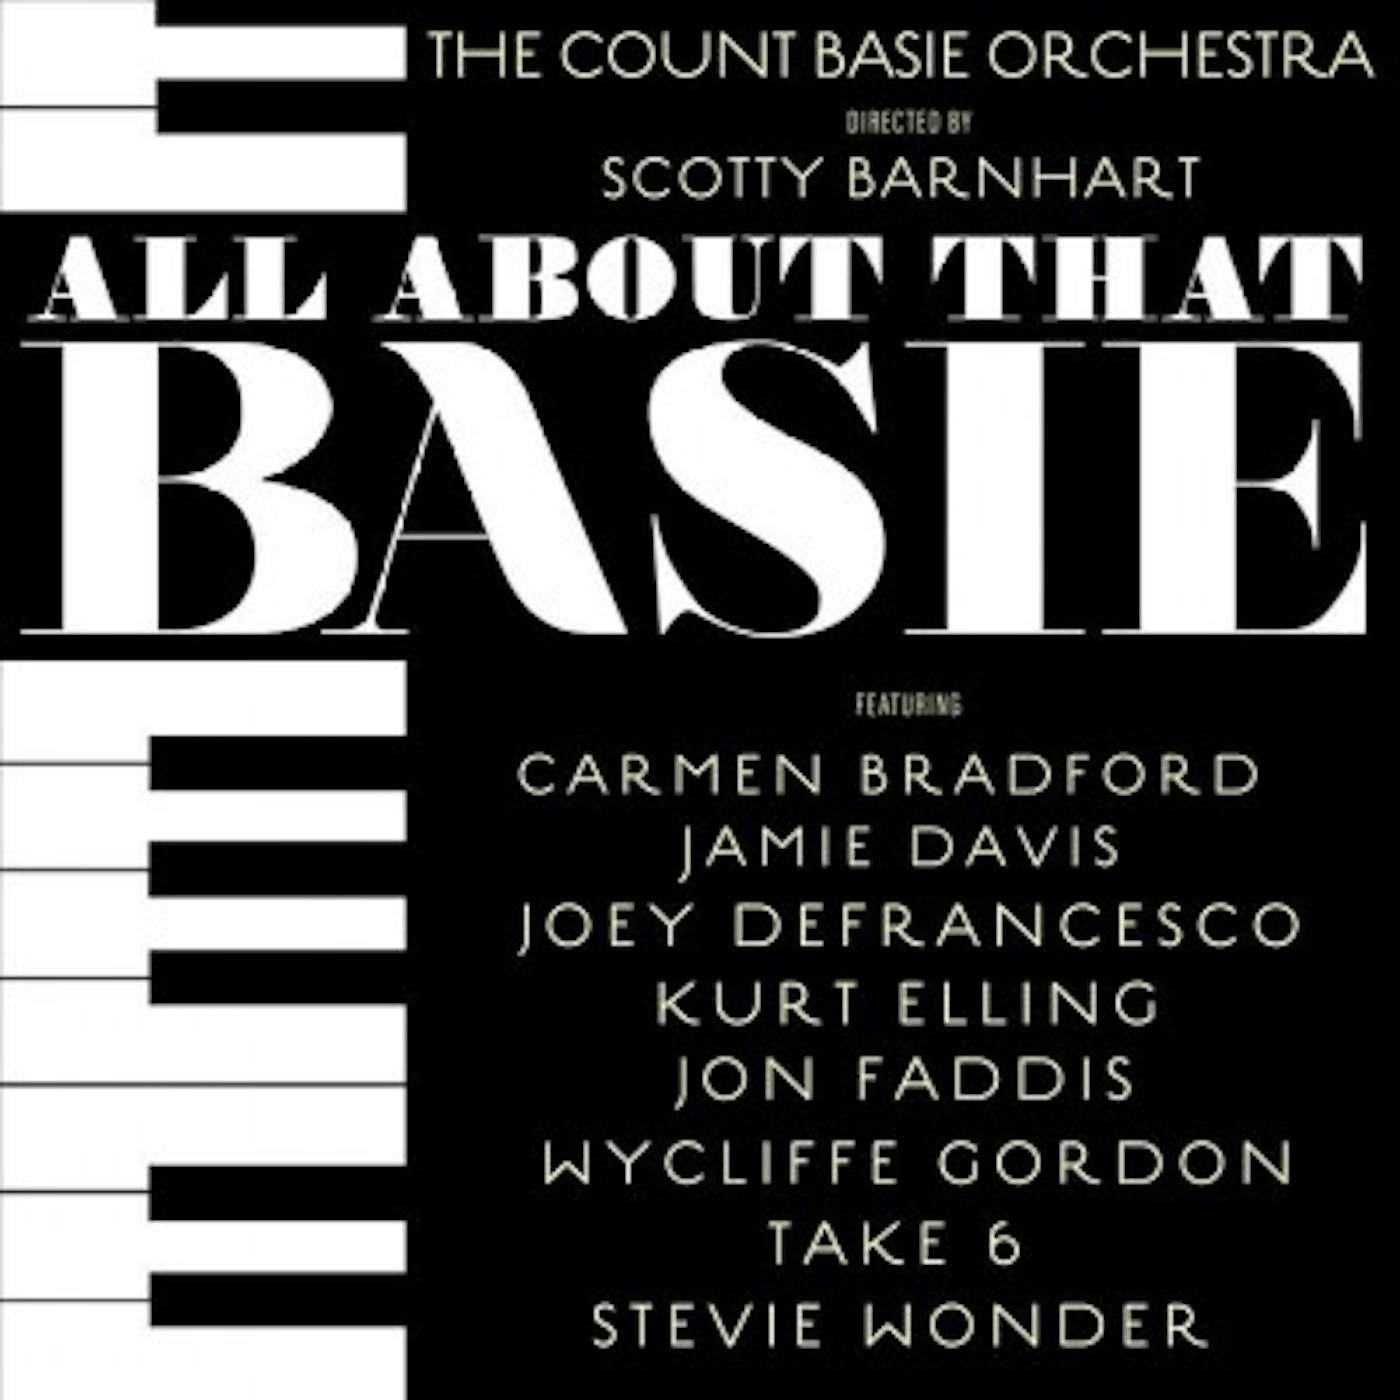 Count Basie Orchestra ALL ABOUT THAT BASIE CD